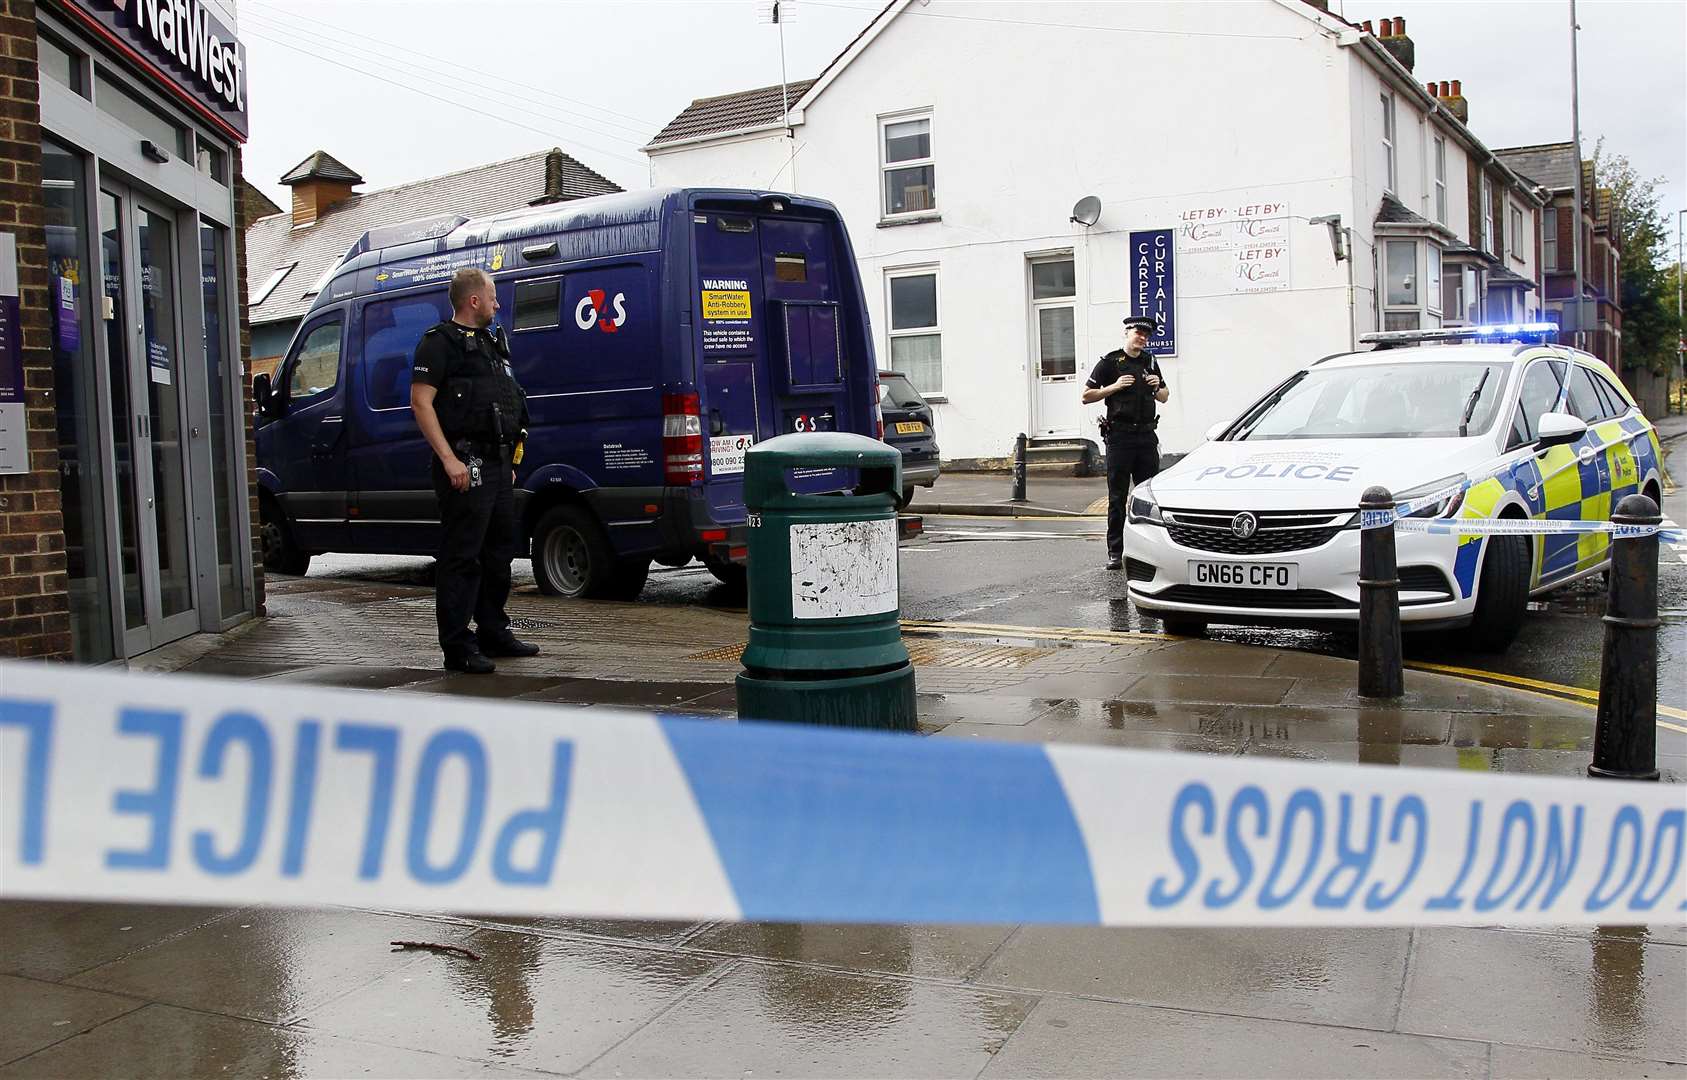 Police and the G4S delivery van at NatWest, in High Street, Rainham. Picture: Sean Aidan